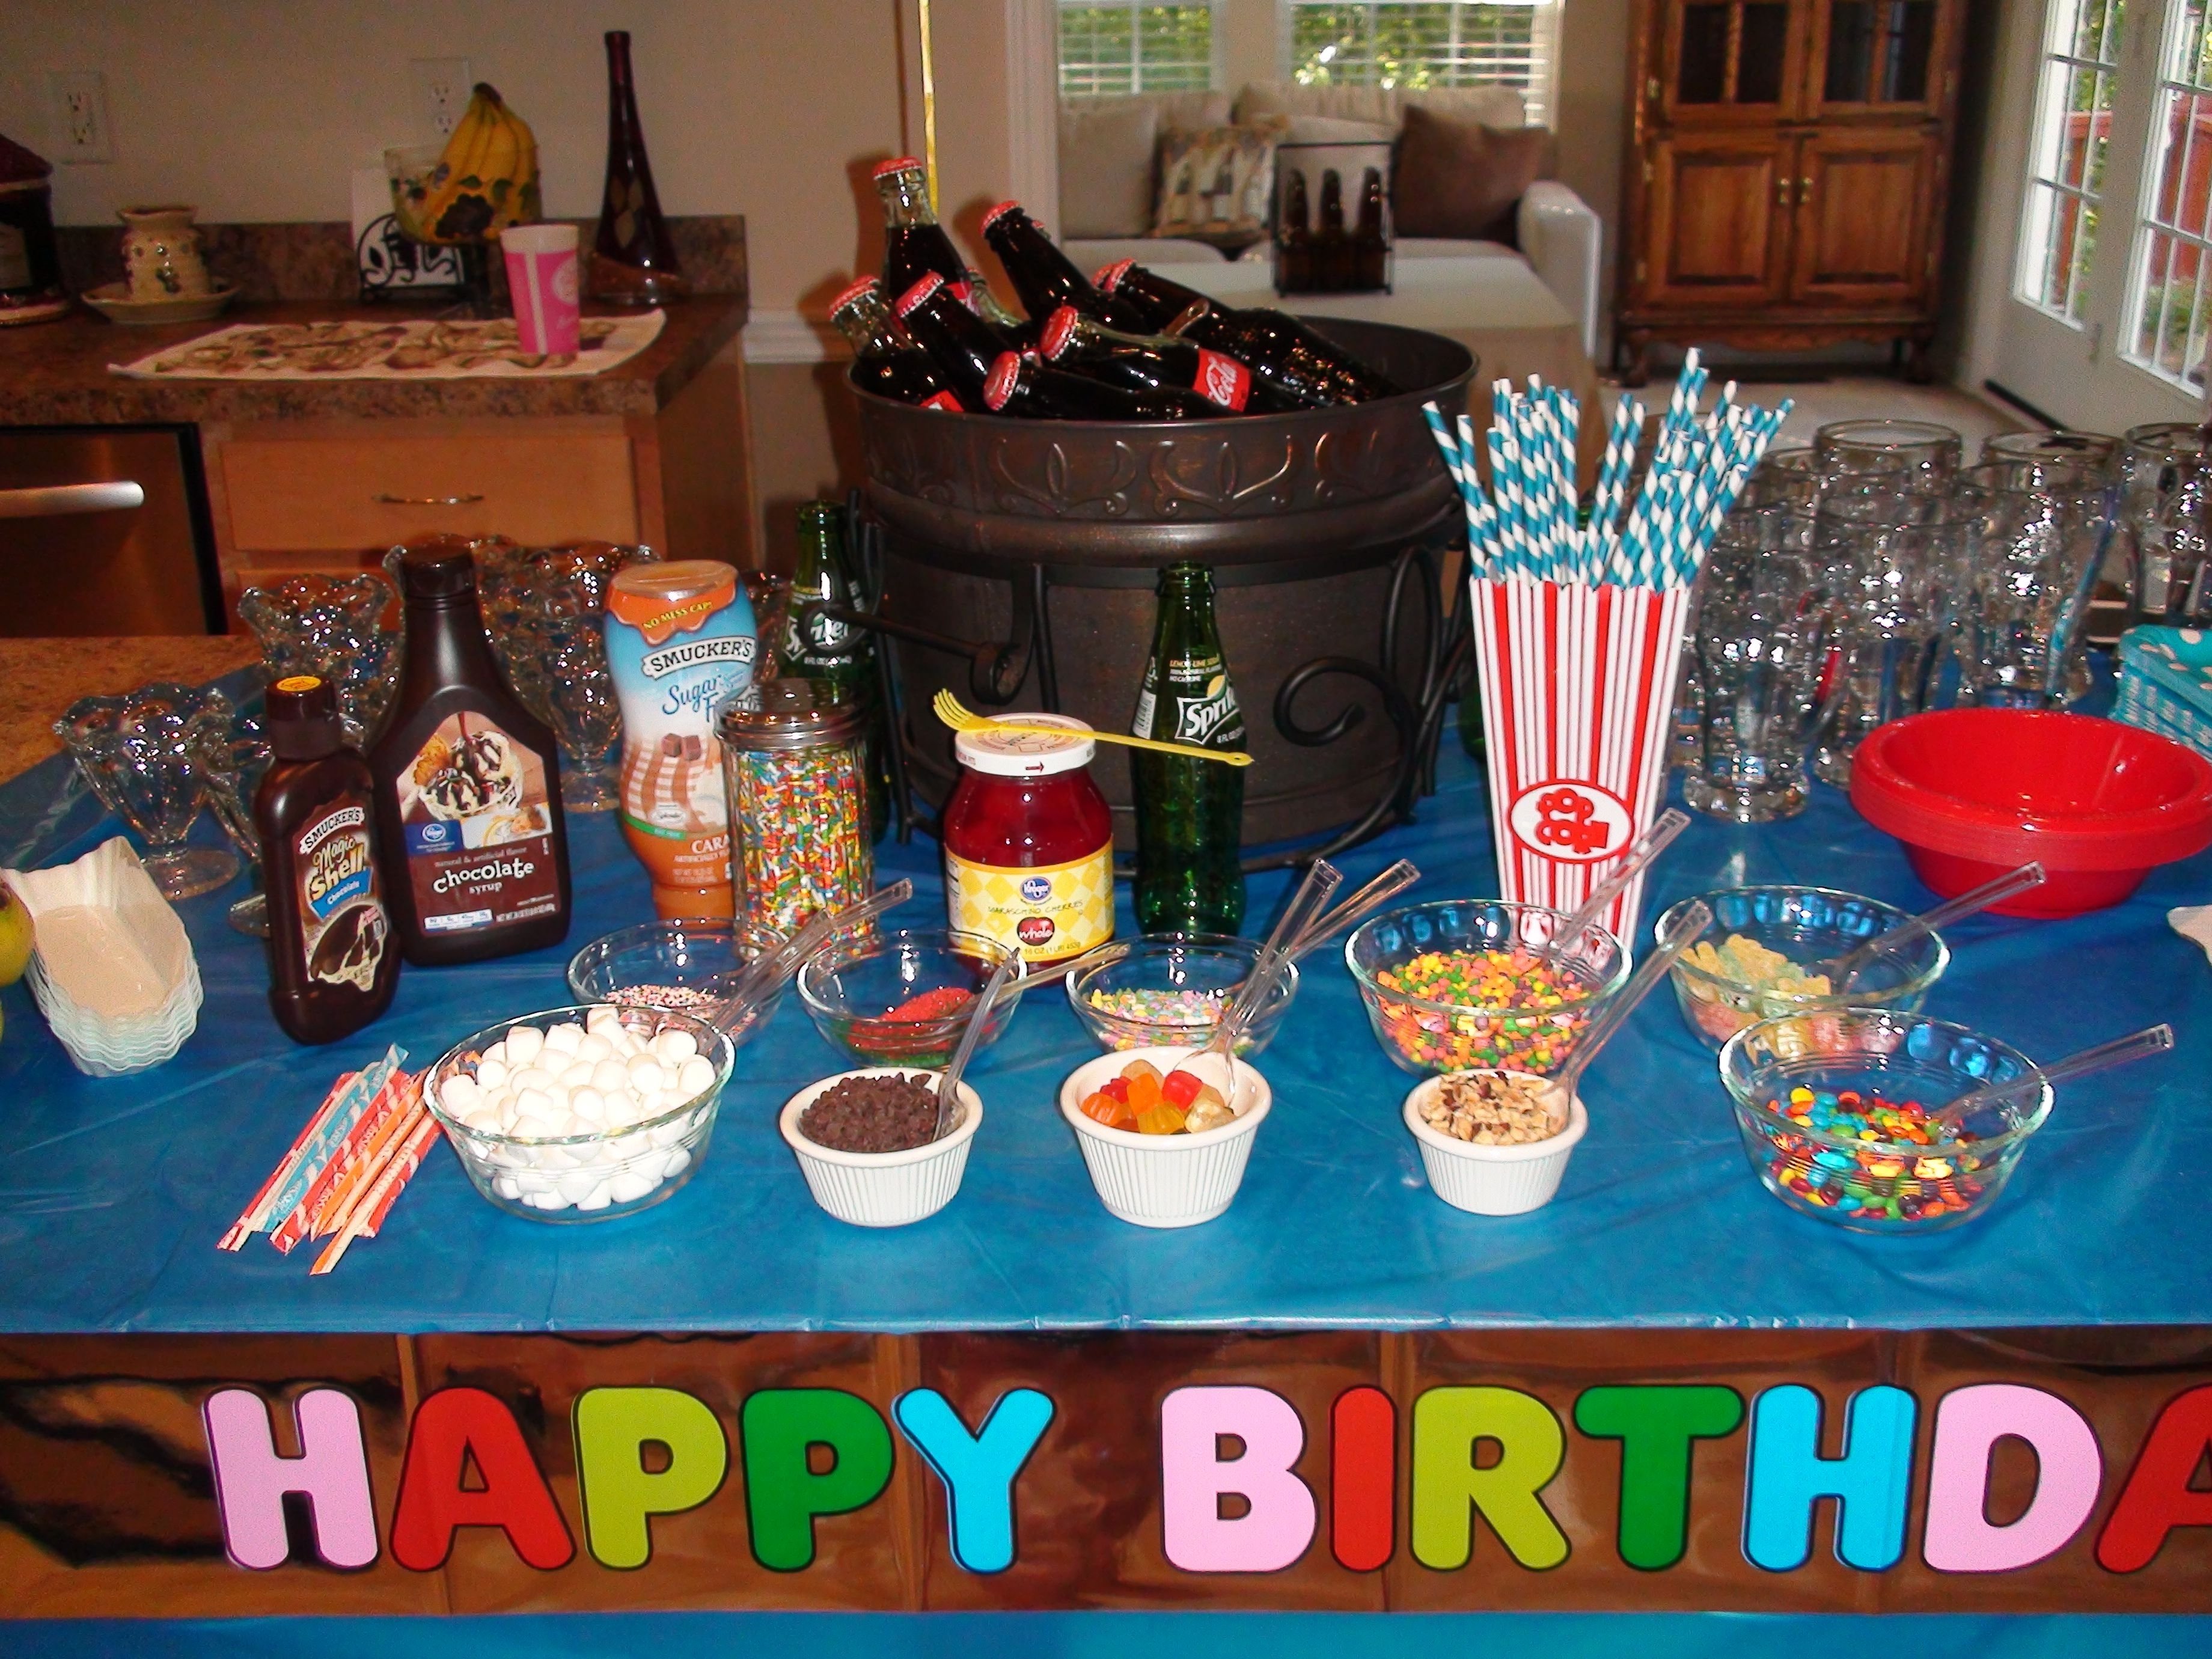 10 Great 19 Year Old Birthday Ideas 12 year old party root beer floats banana splits ice cream with 7 2022